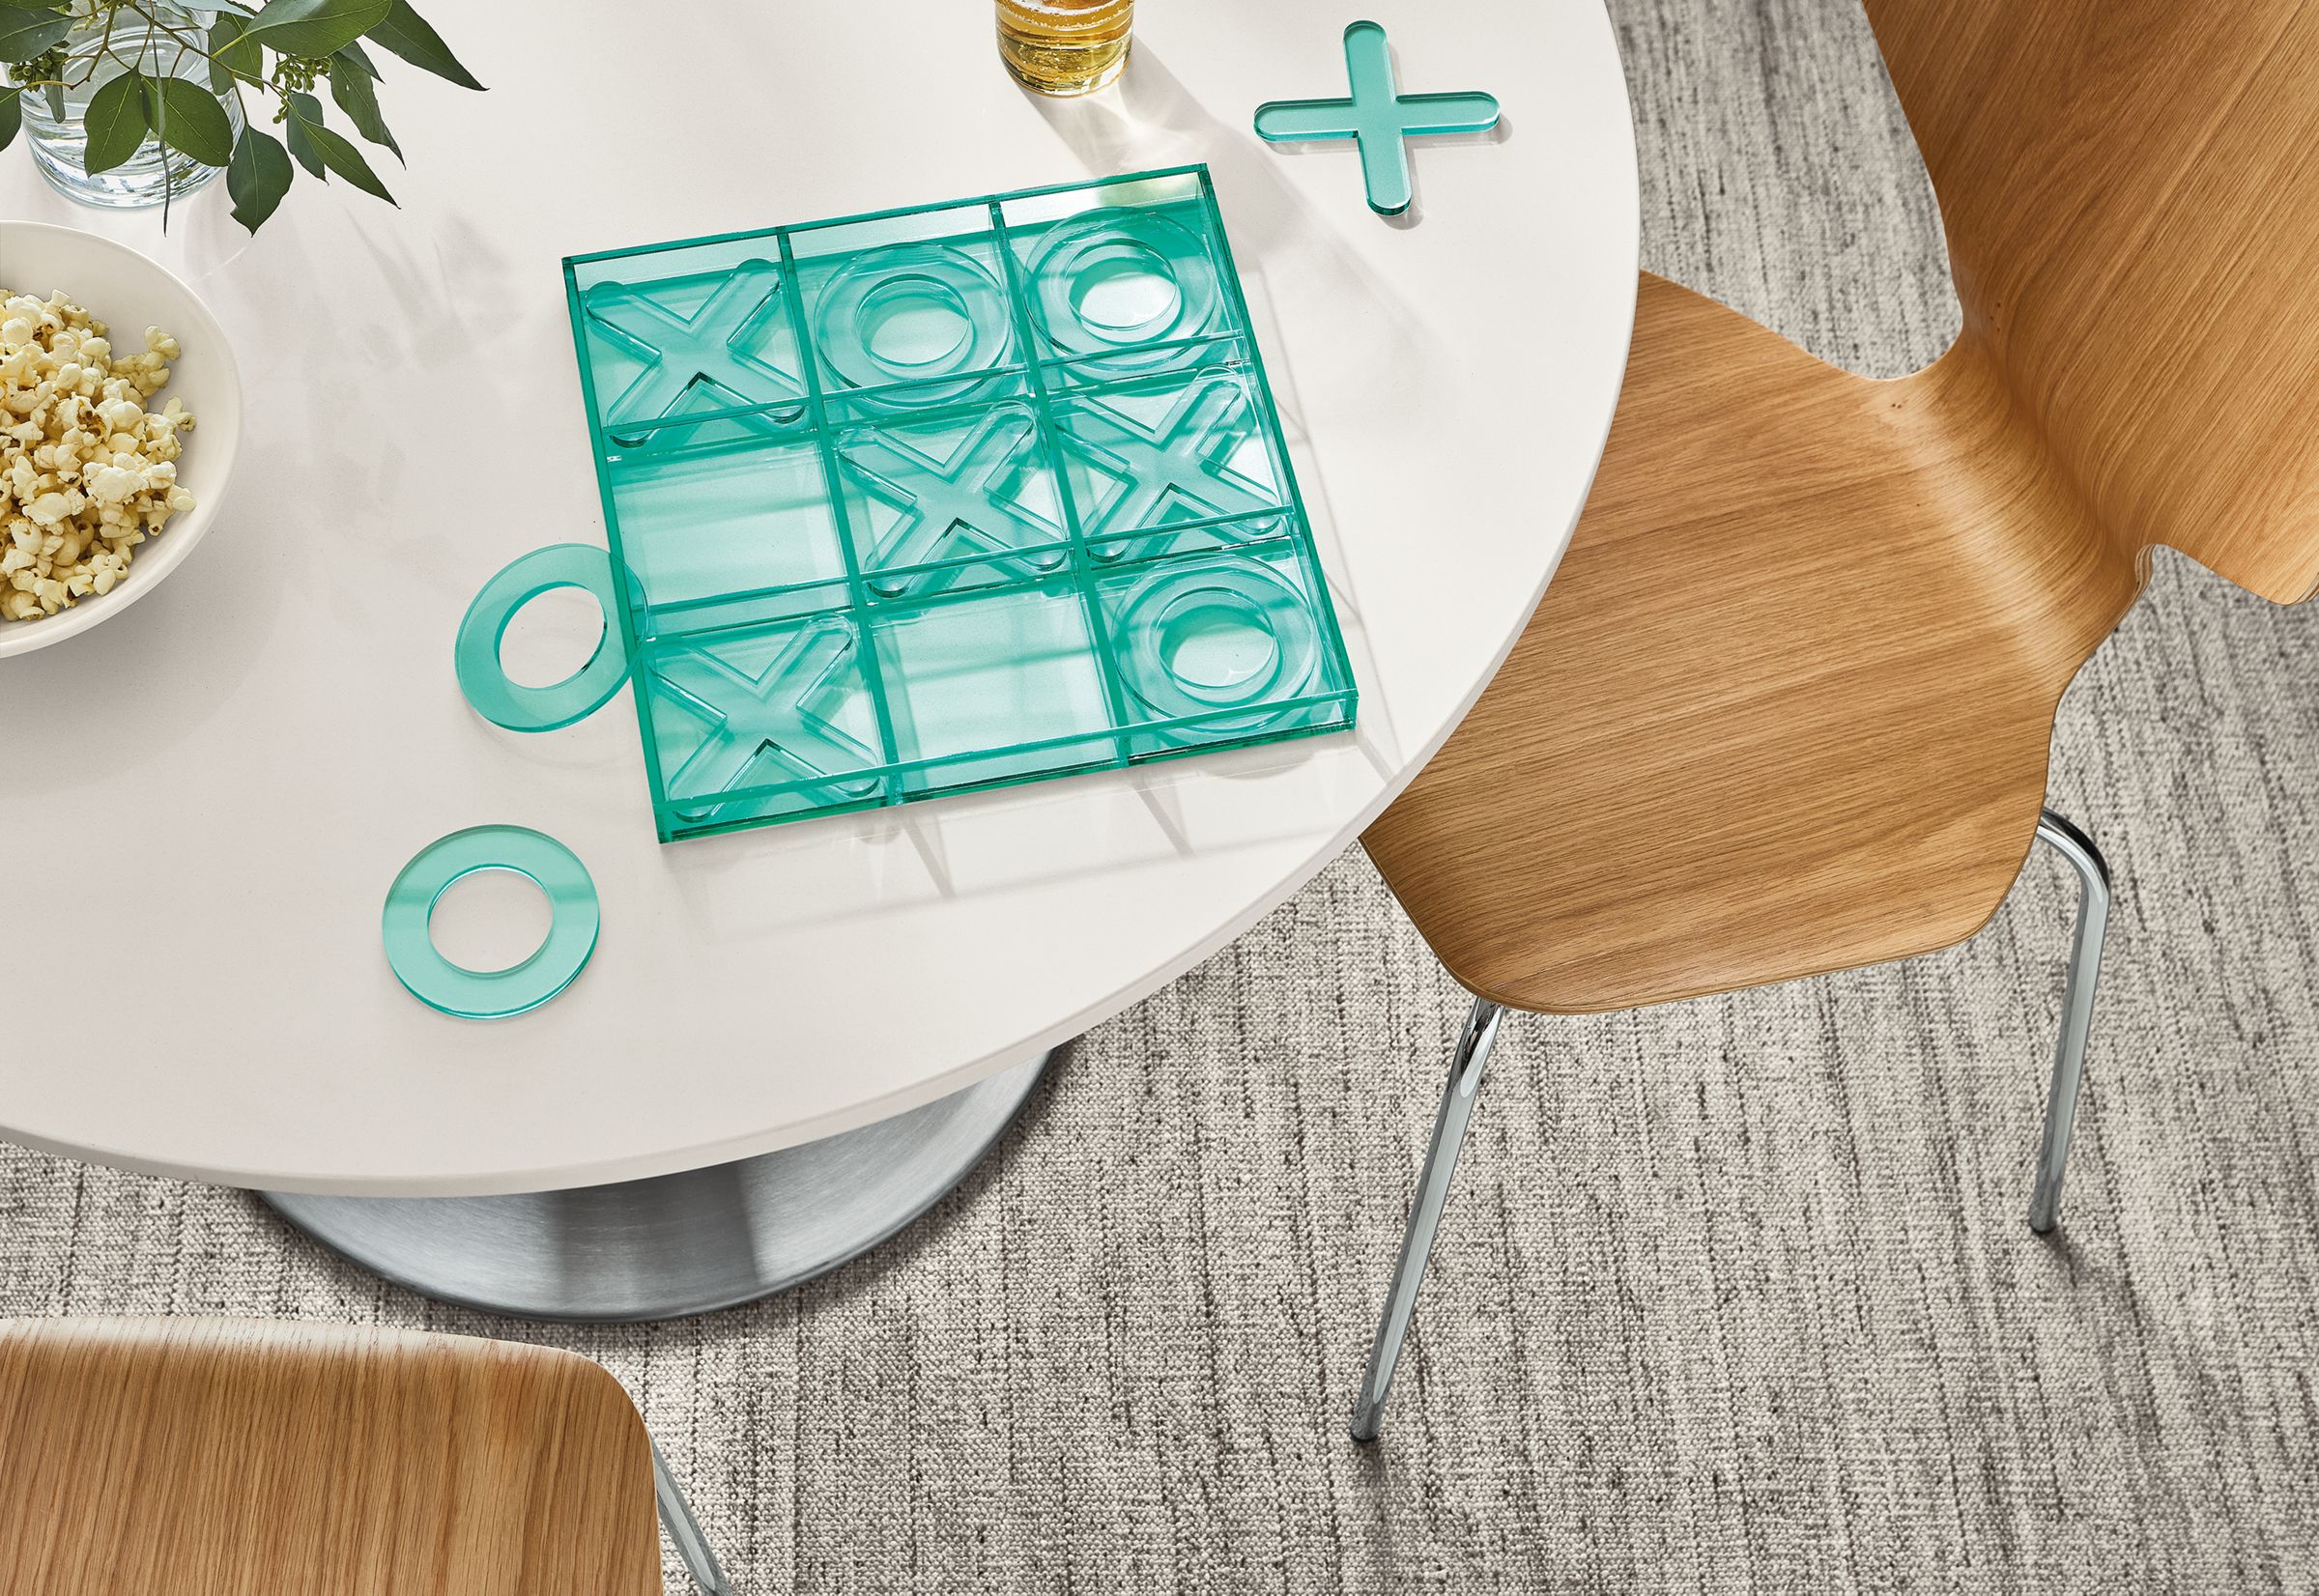 detail of Putnam tic tac toe set on white round dining table.